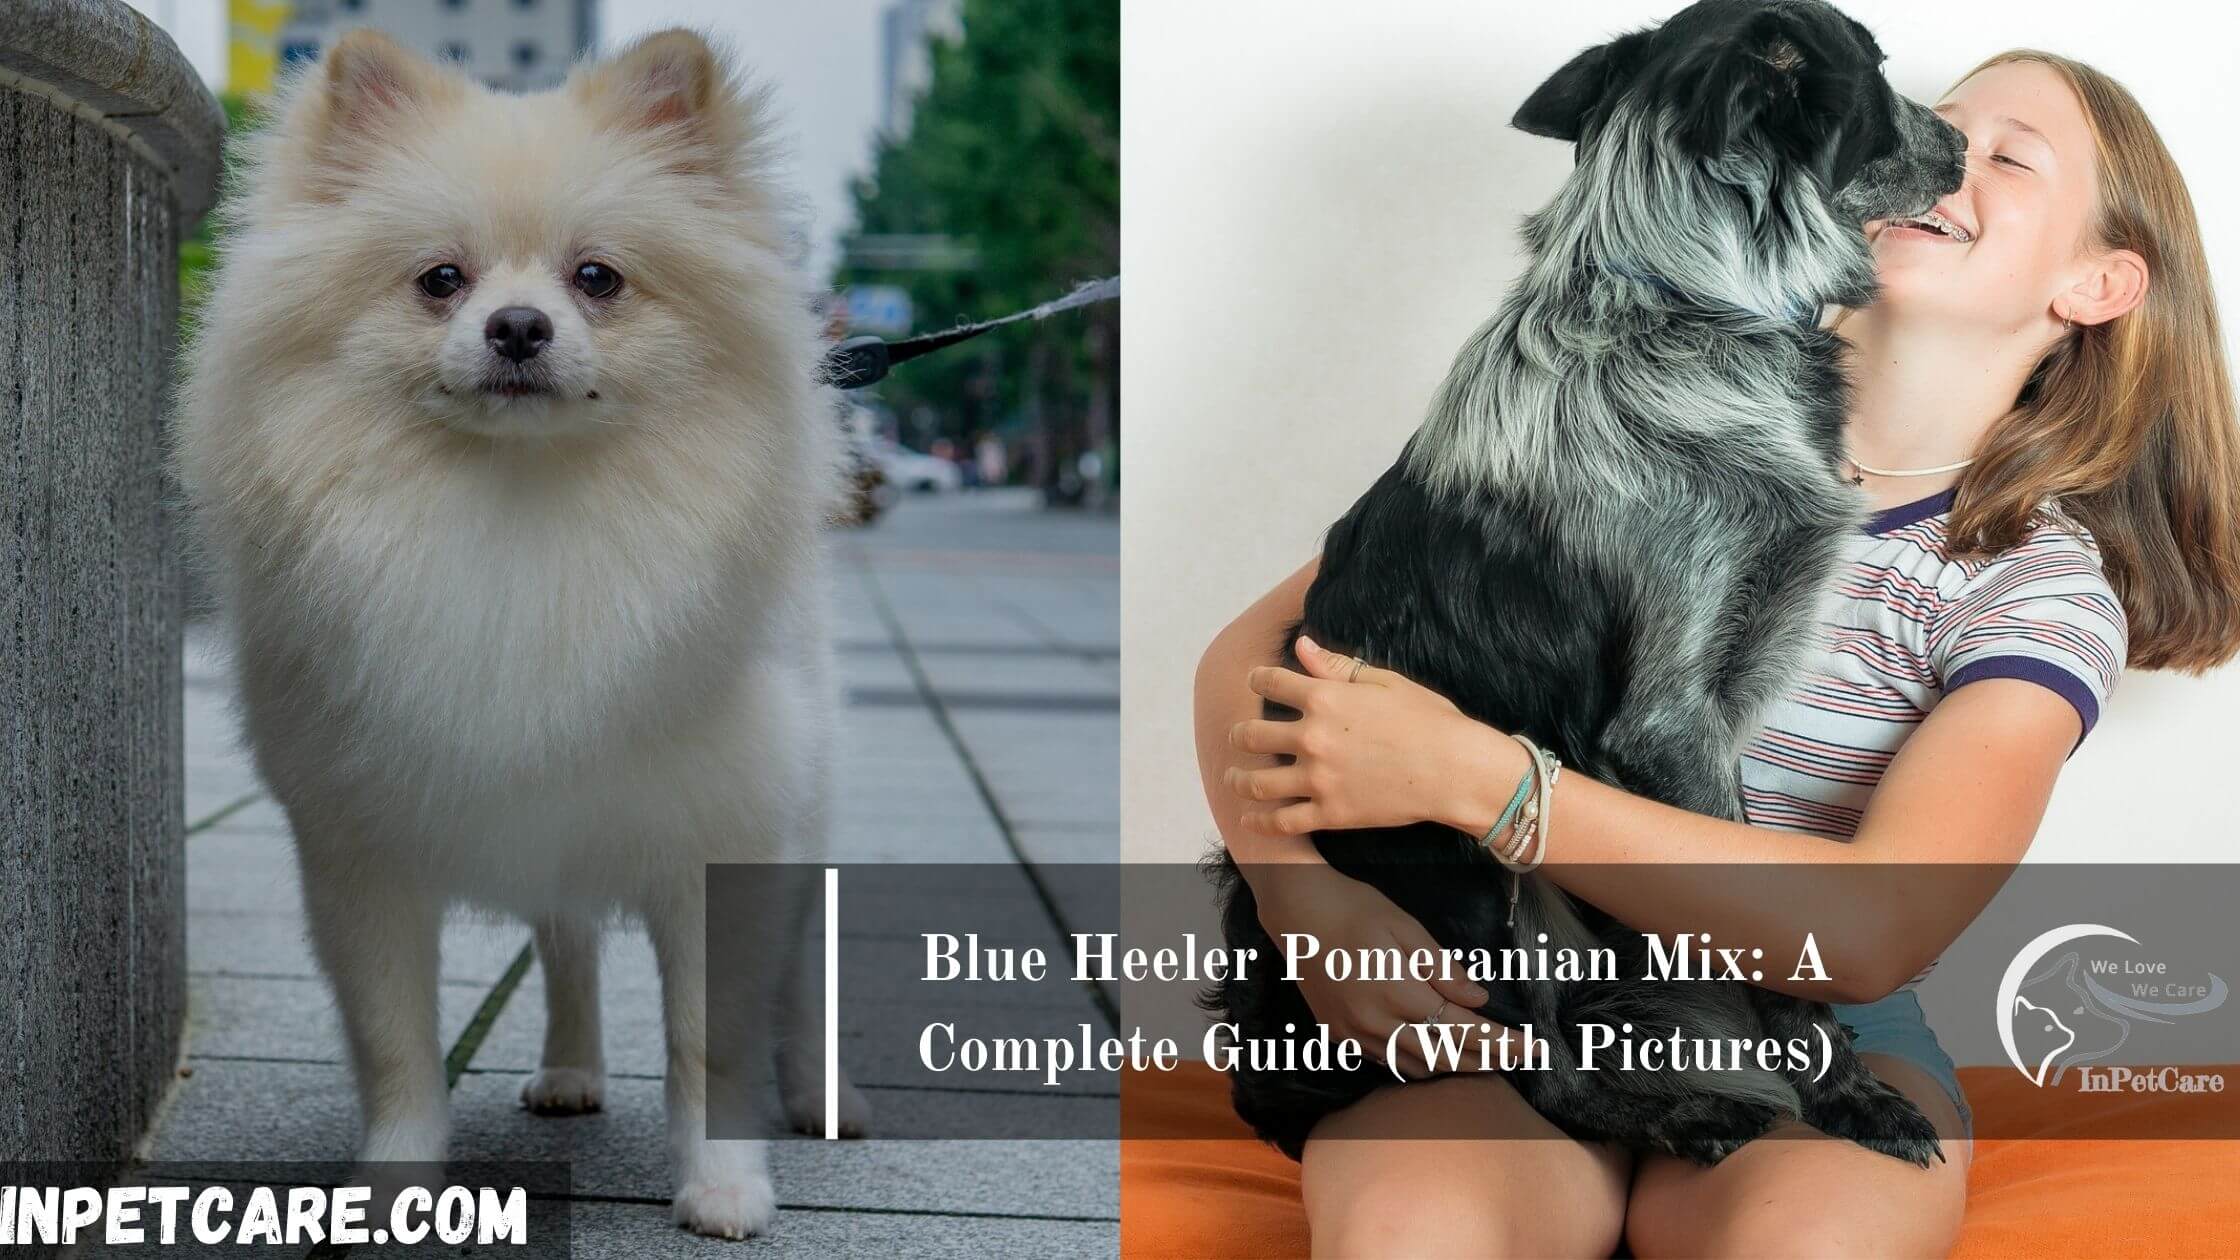 Blue Heeler Pomeranian Mix: A Complete Guide (With Pictures)